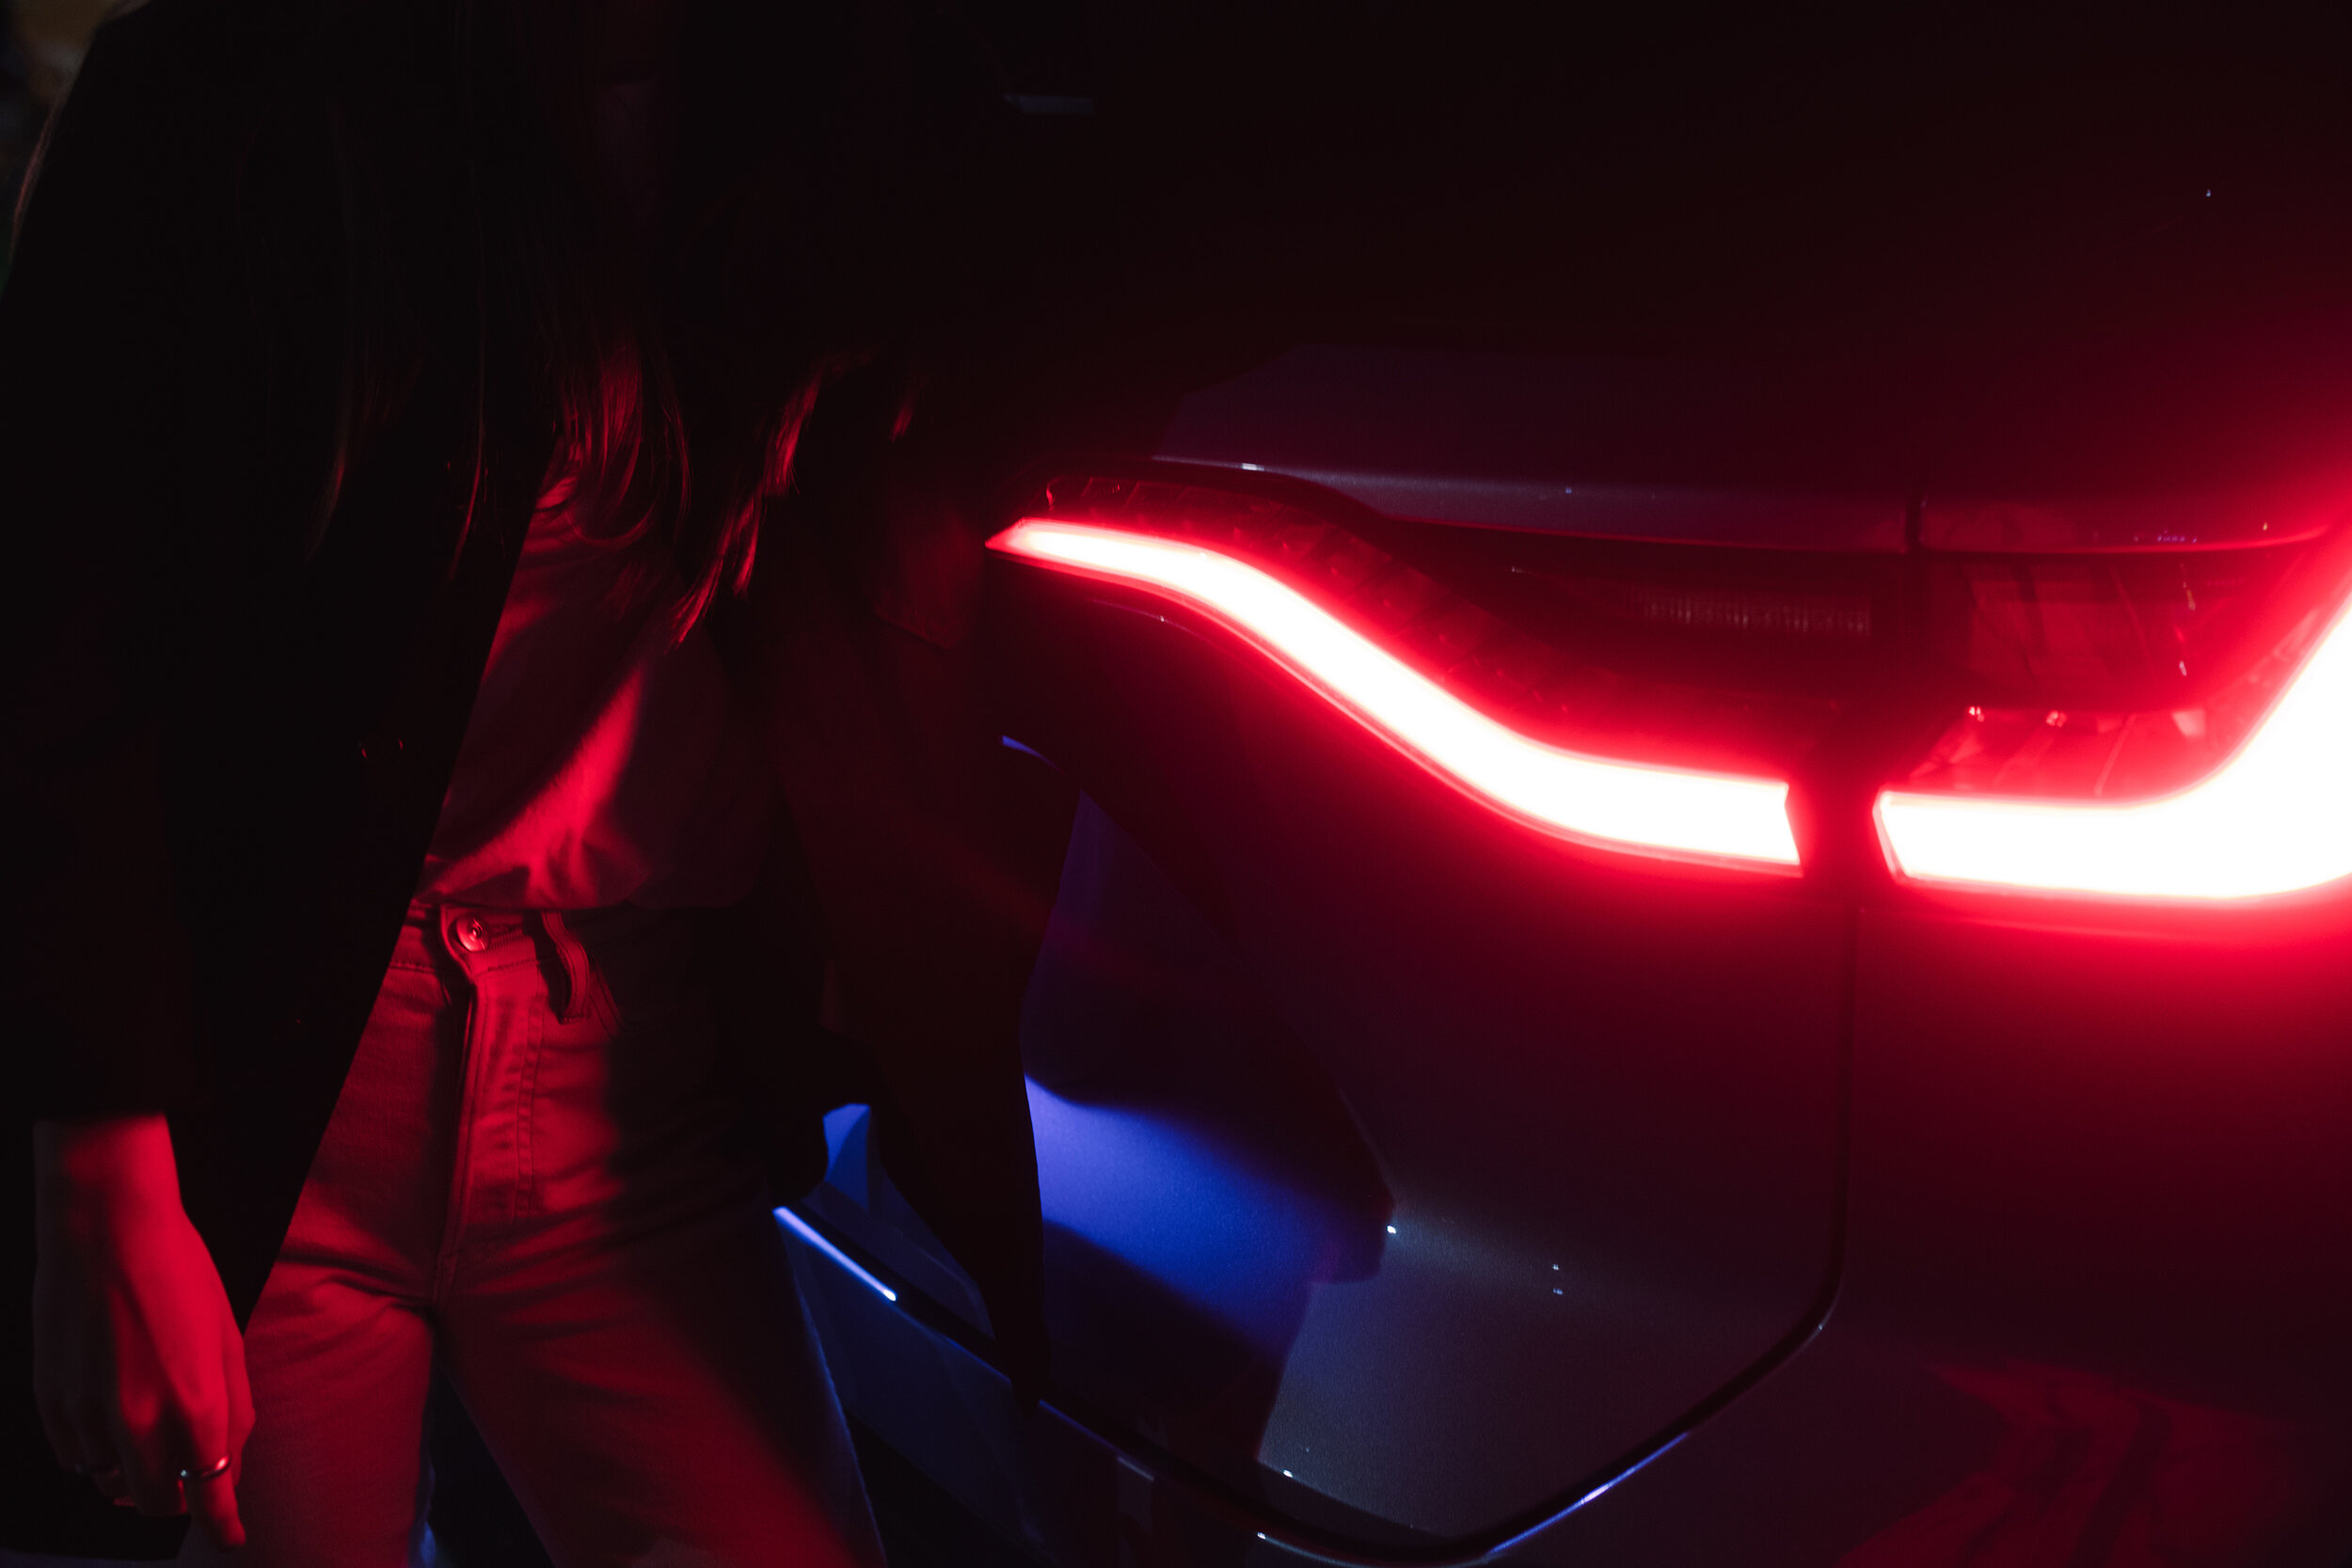 The back lights at night of the NIO ES8